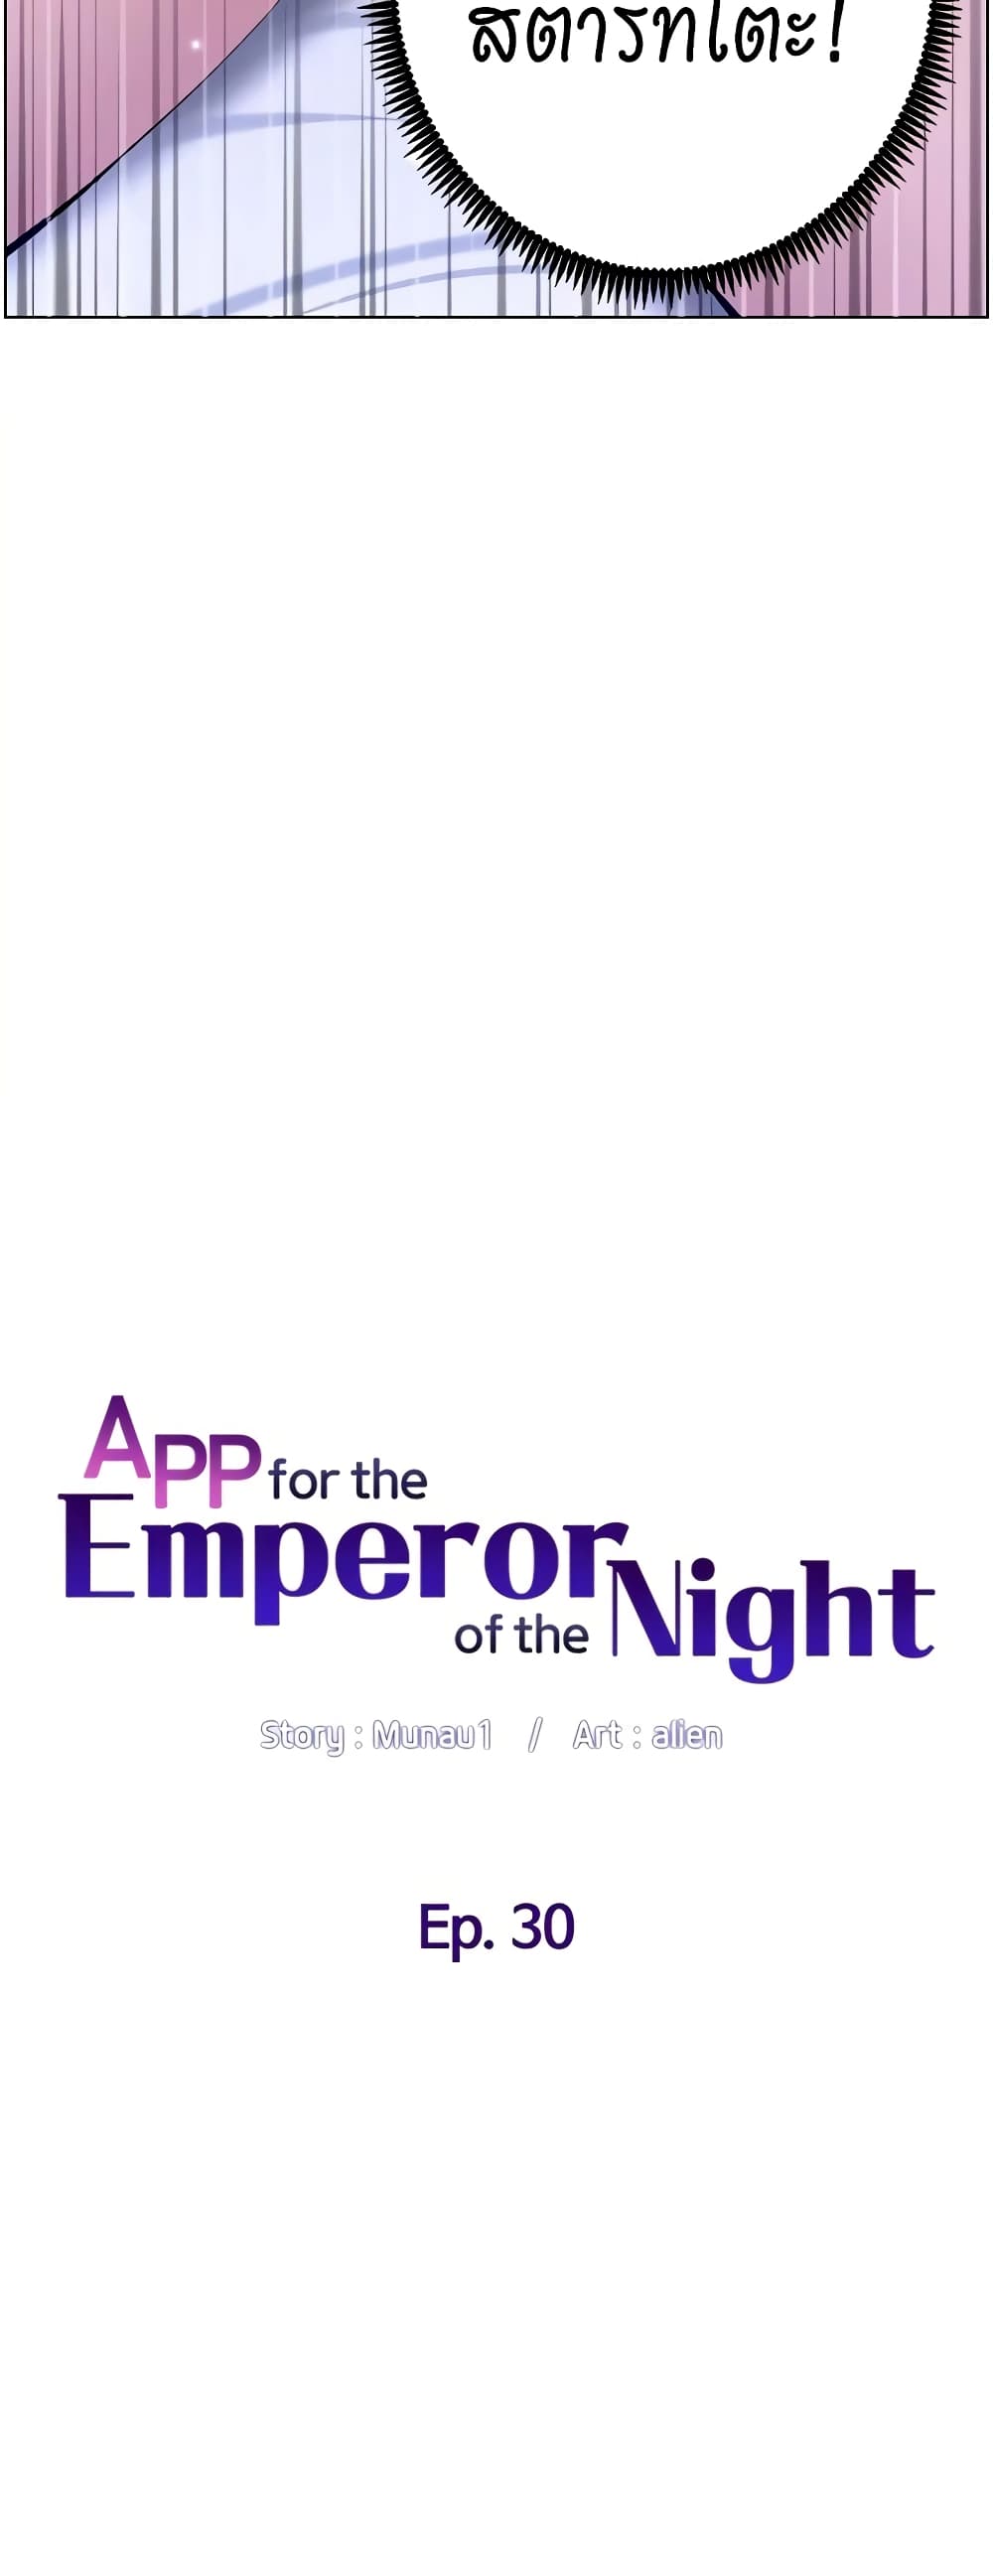 APP for the Emperor of the Night 30-30